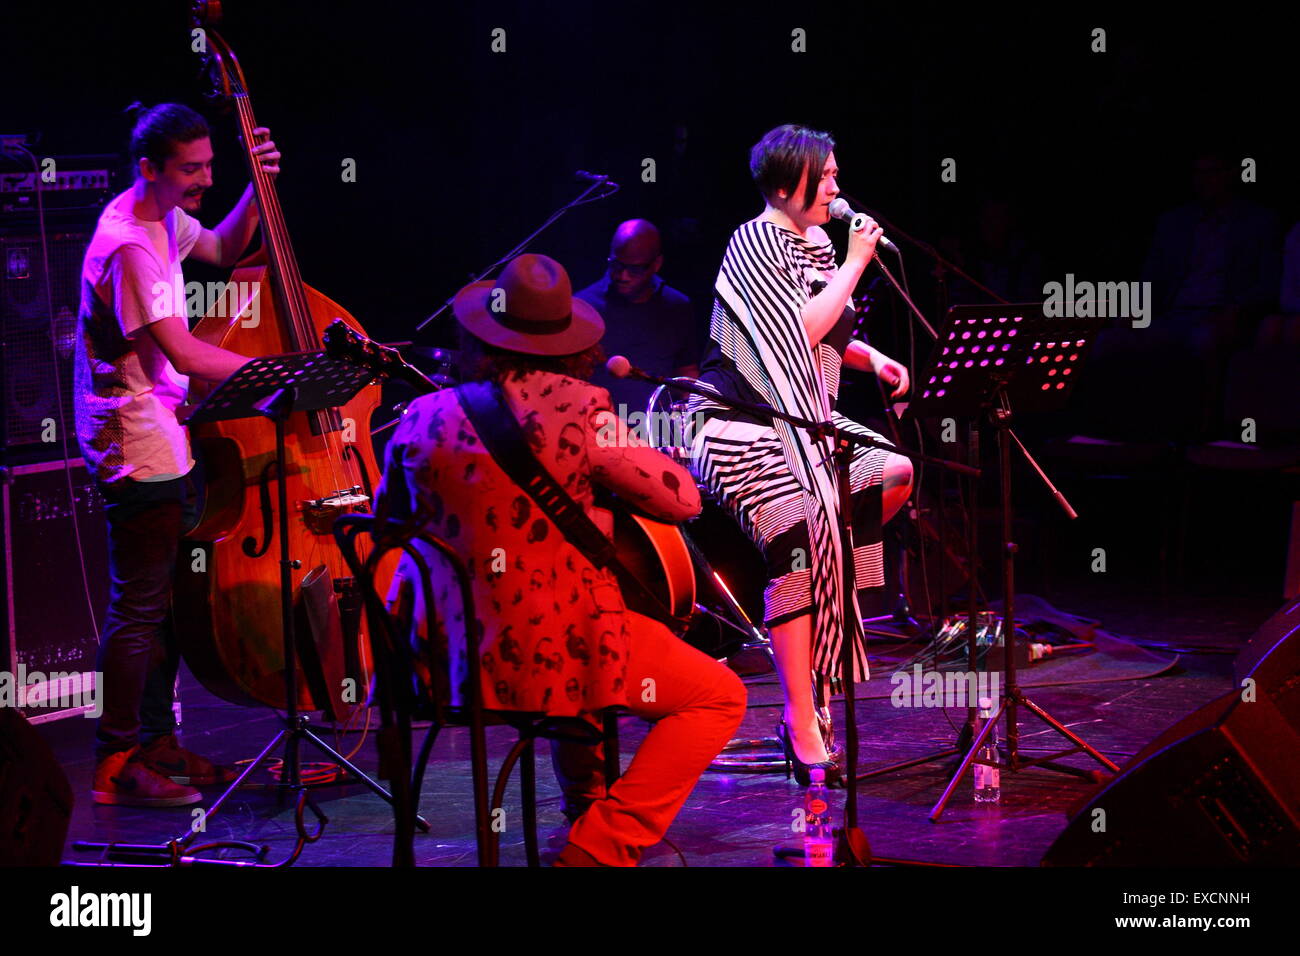 Gdynia, Poland. 11th July, 2015. 10th Ladies' Jazz Festival starts in Gdynia. Mika Urbaniak Quartet performs live on the stage during the first day of the Festival in Gdynia Musical Theatre Credit:  Michal Fludra/Alamy Live News Stock Photo